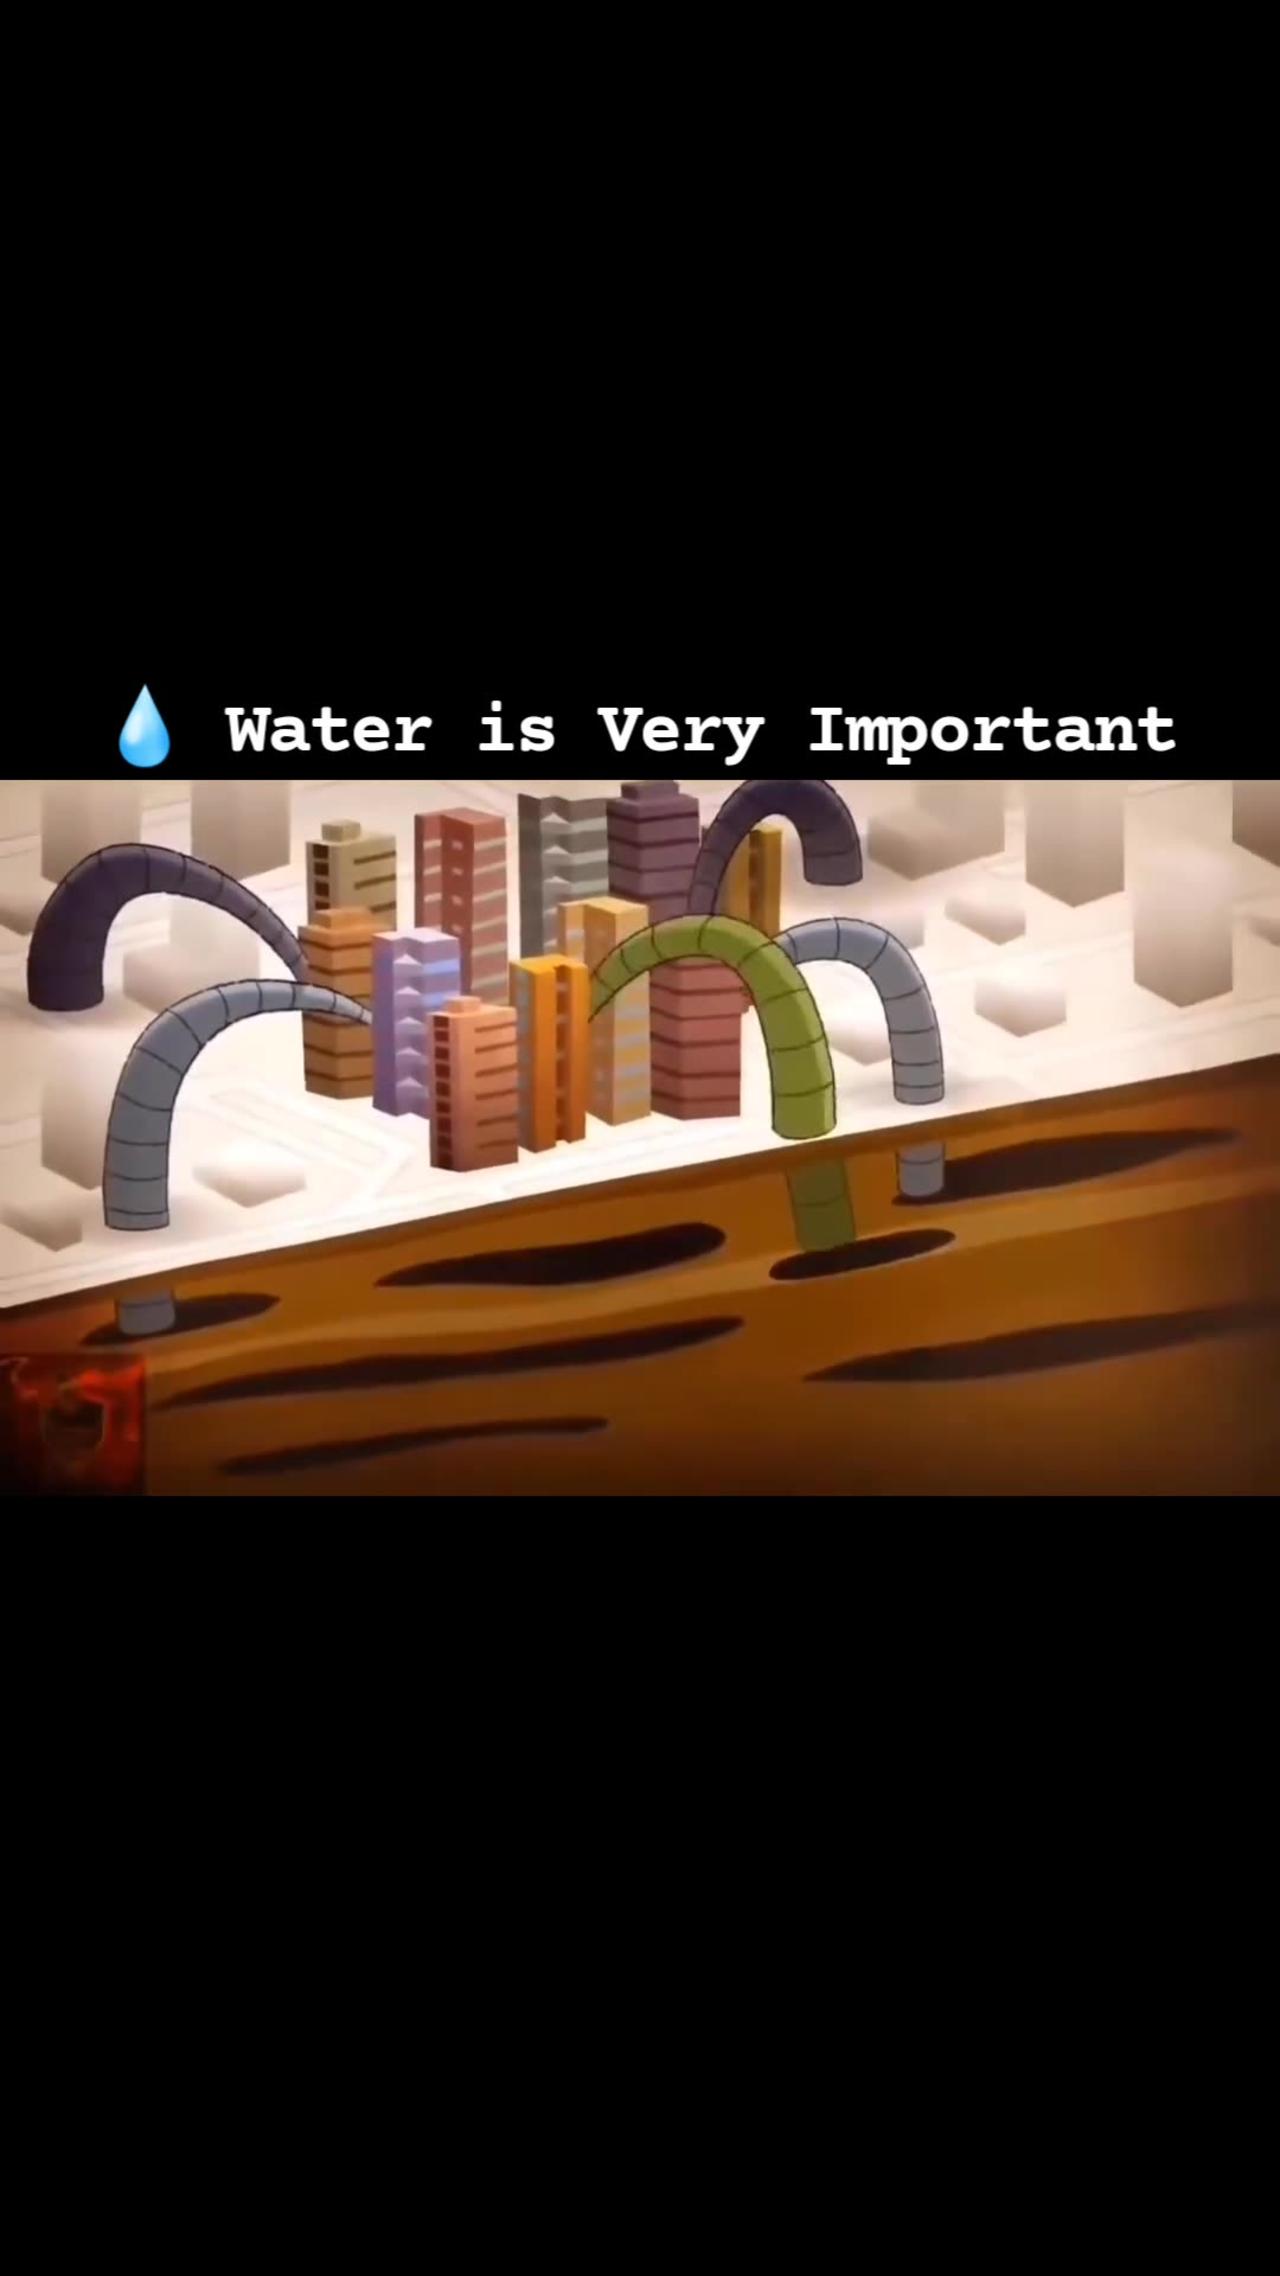 do not wast the water